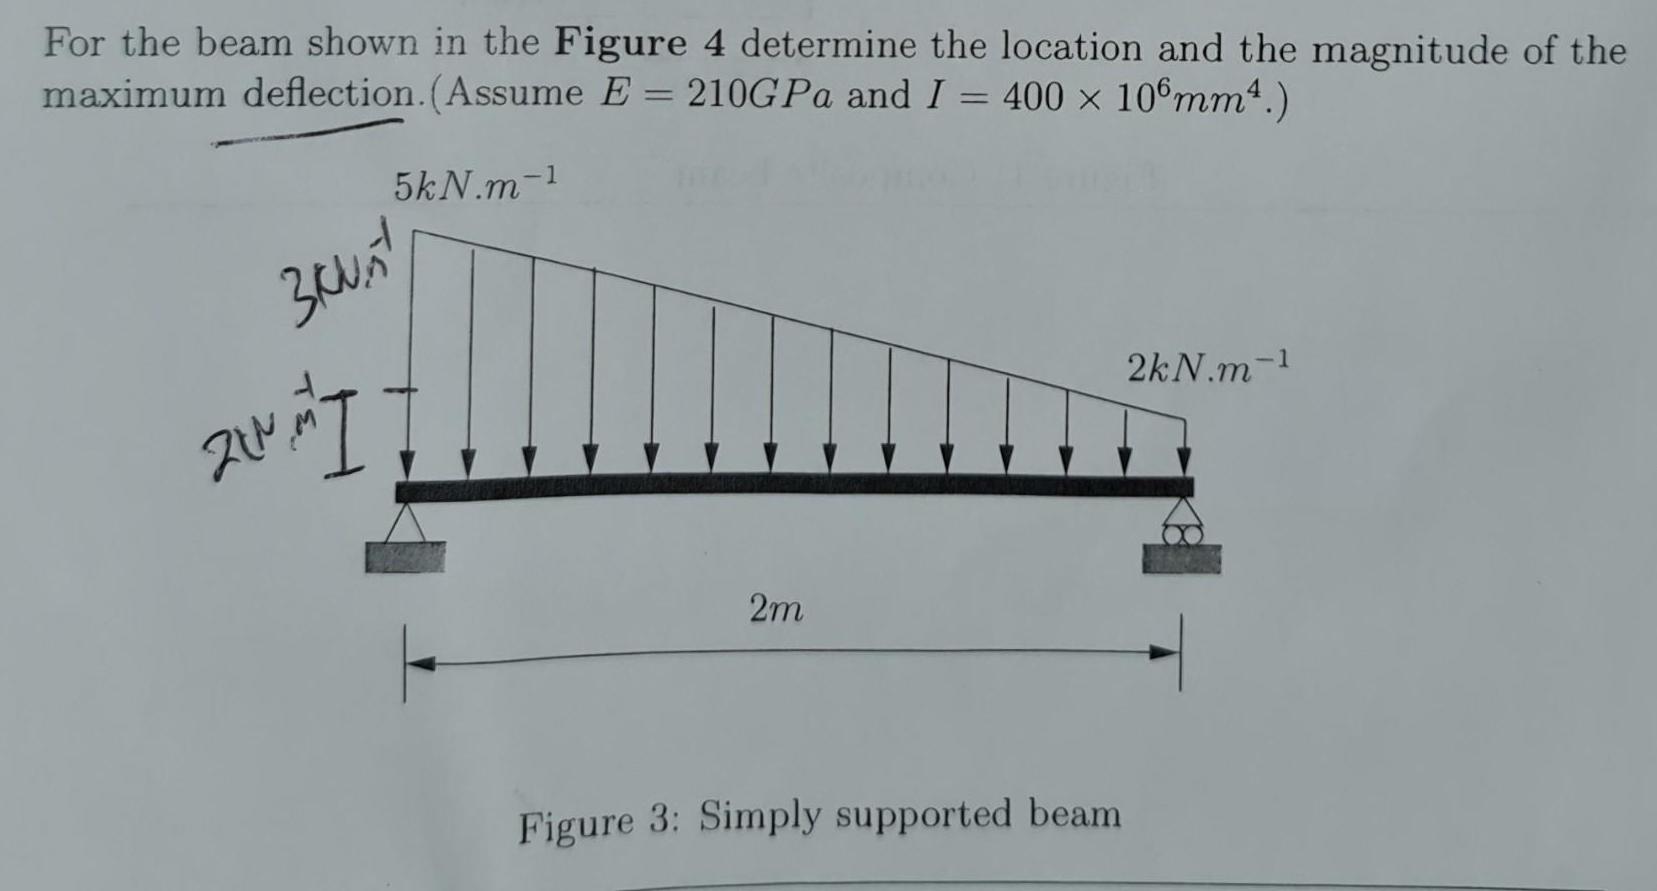 For the beam shown in the Figure 4 determine the location and the magnitude of the maximum deflection.